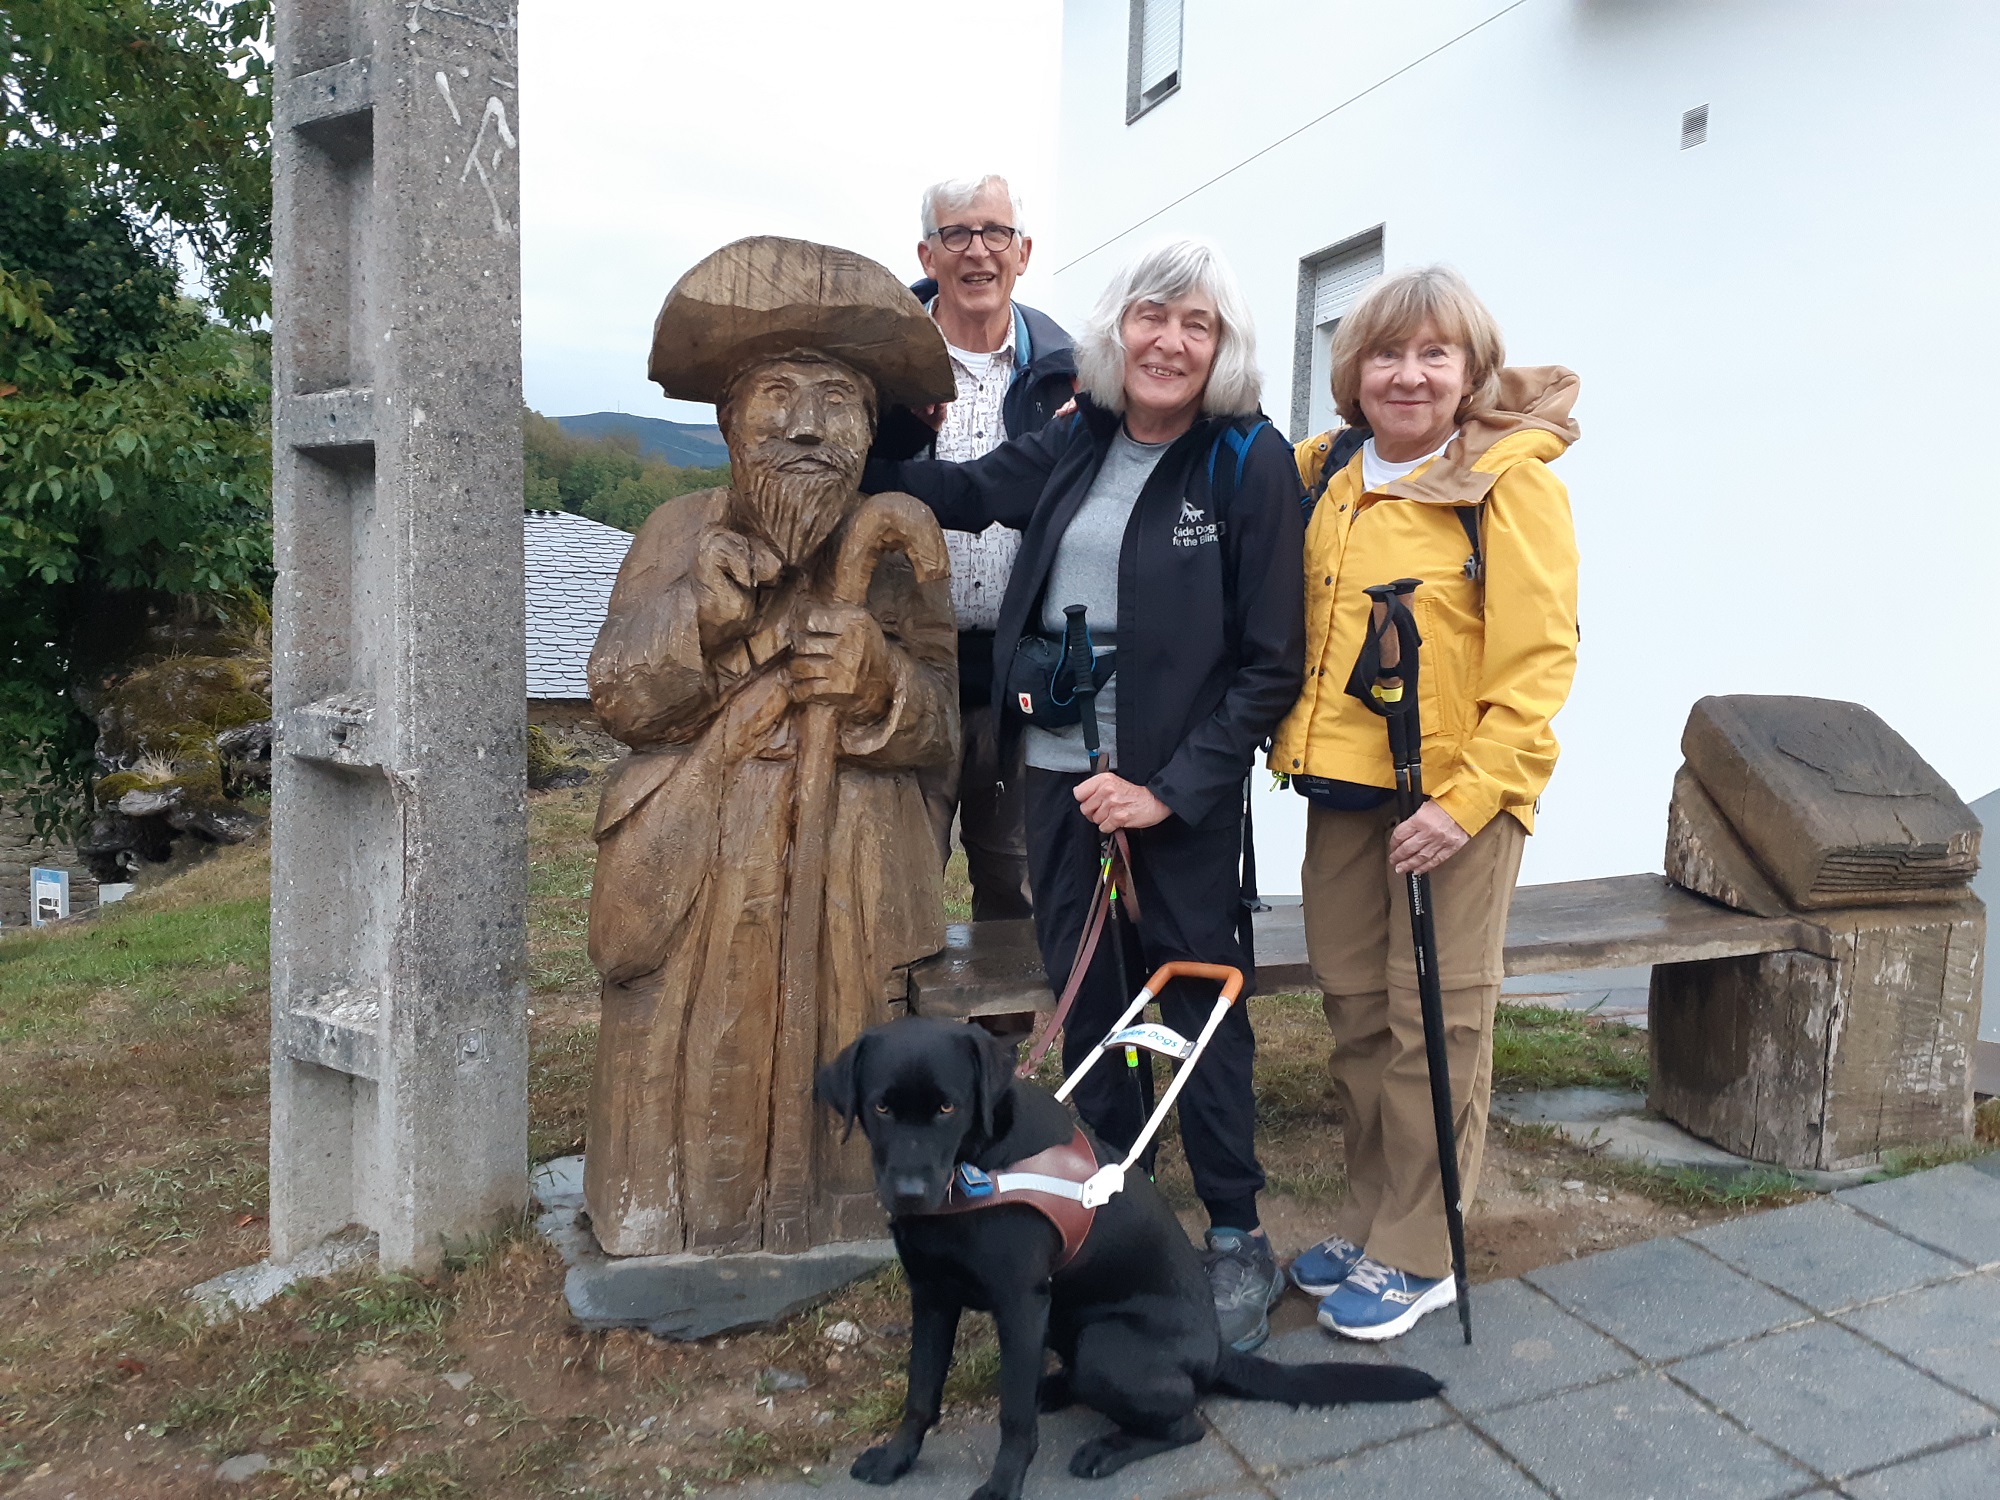 Joan with her black Lab guide dog and two friends Deb and John stand next to a wooden statueof St. James along the Camino.